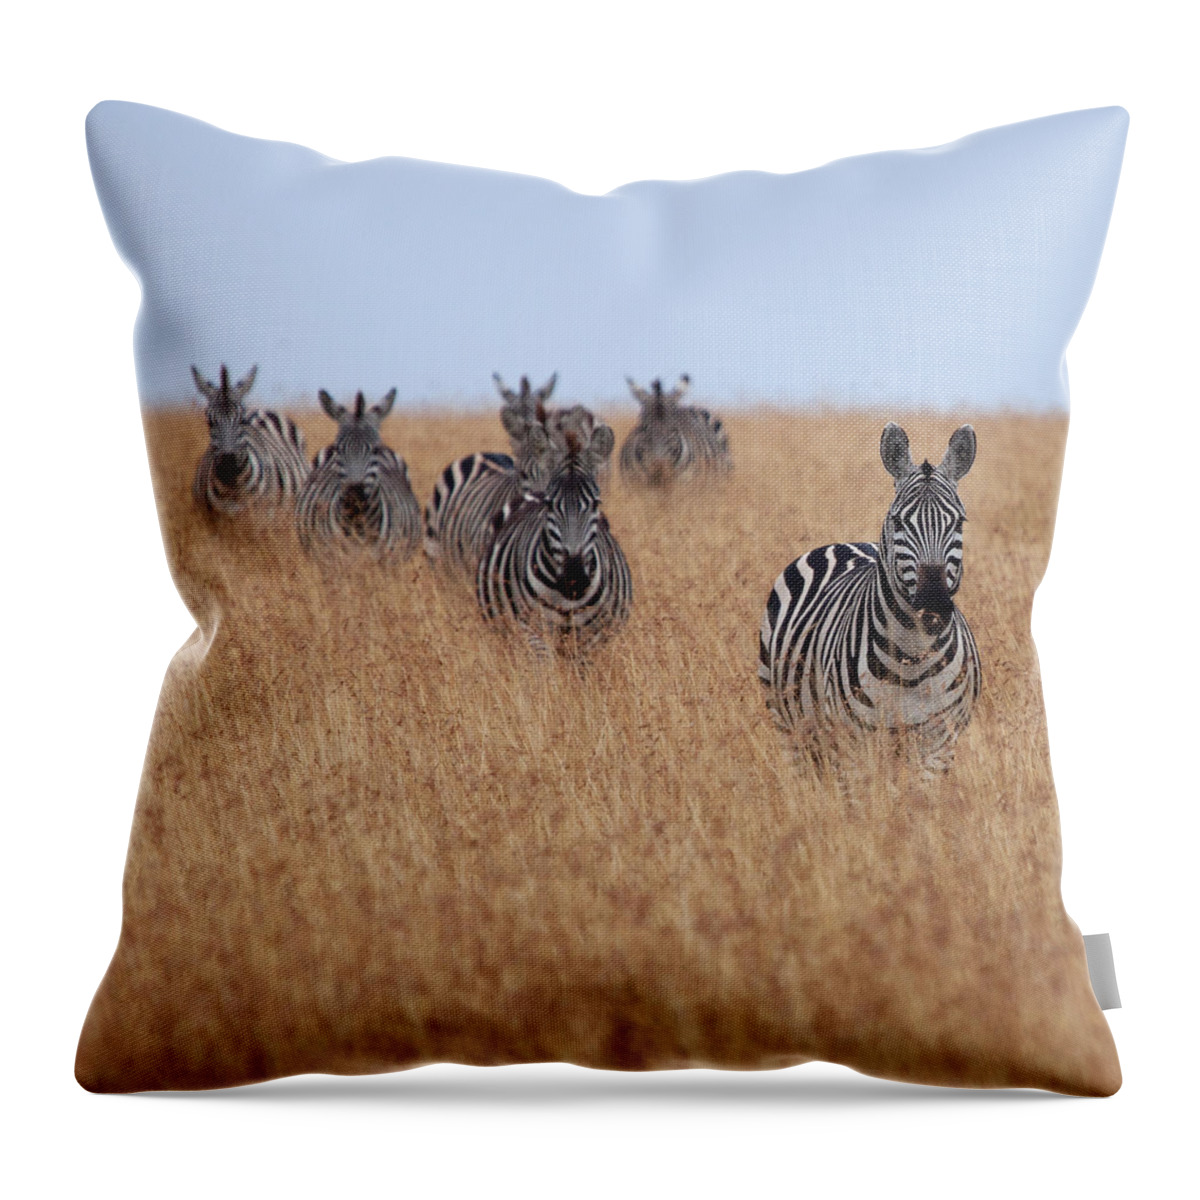 Kenya Throw Pillow featuring the photograph Zebras by Photo By Roger Cave